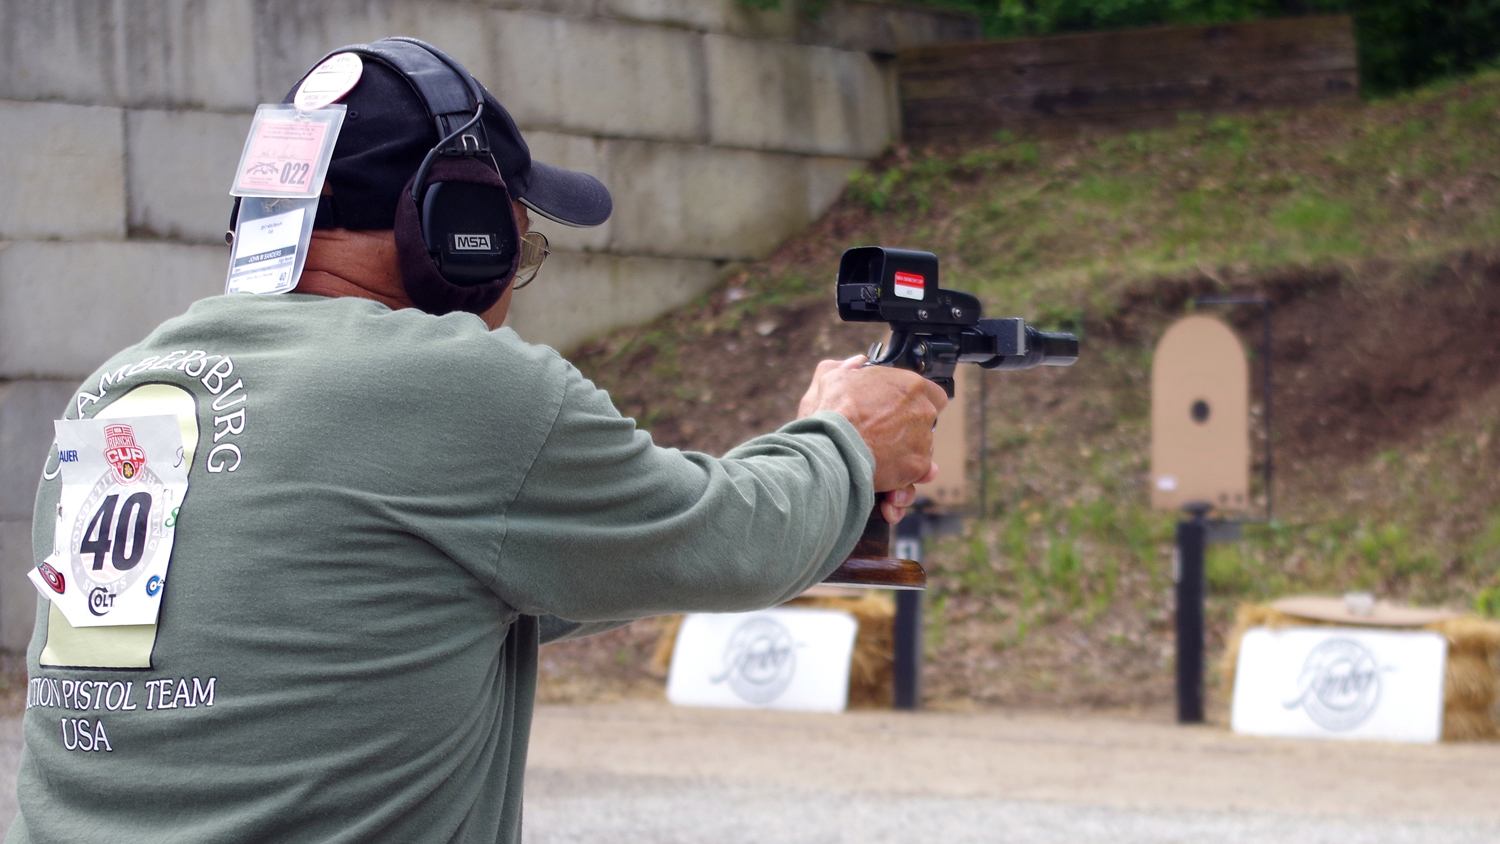 John Sanders at the 2017 NRA Bianchi Cup